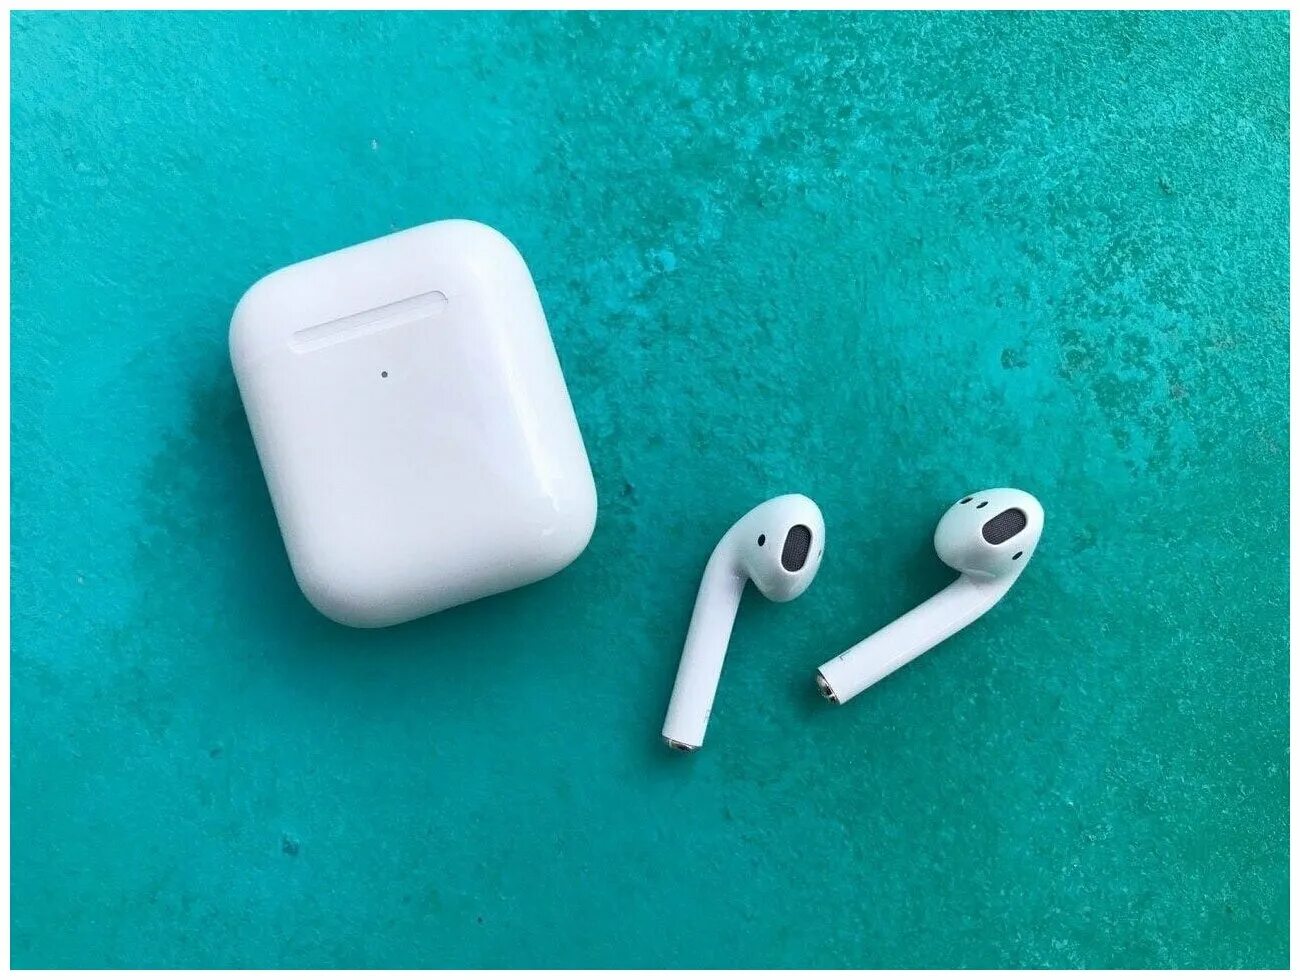 Airpods air 2. Apple AIRPODS 2. Наушники беспроводные Apple AIRPODS 2. Наушники беспроводные Apple AIRPODS 1. Apple наушники беспроводные AIRPODS Pro Pro 2.